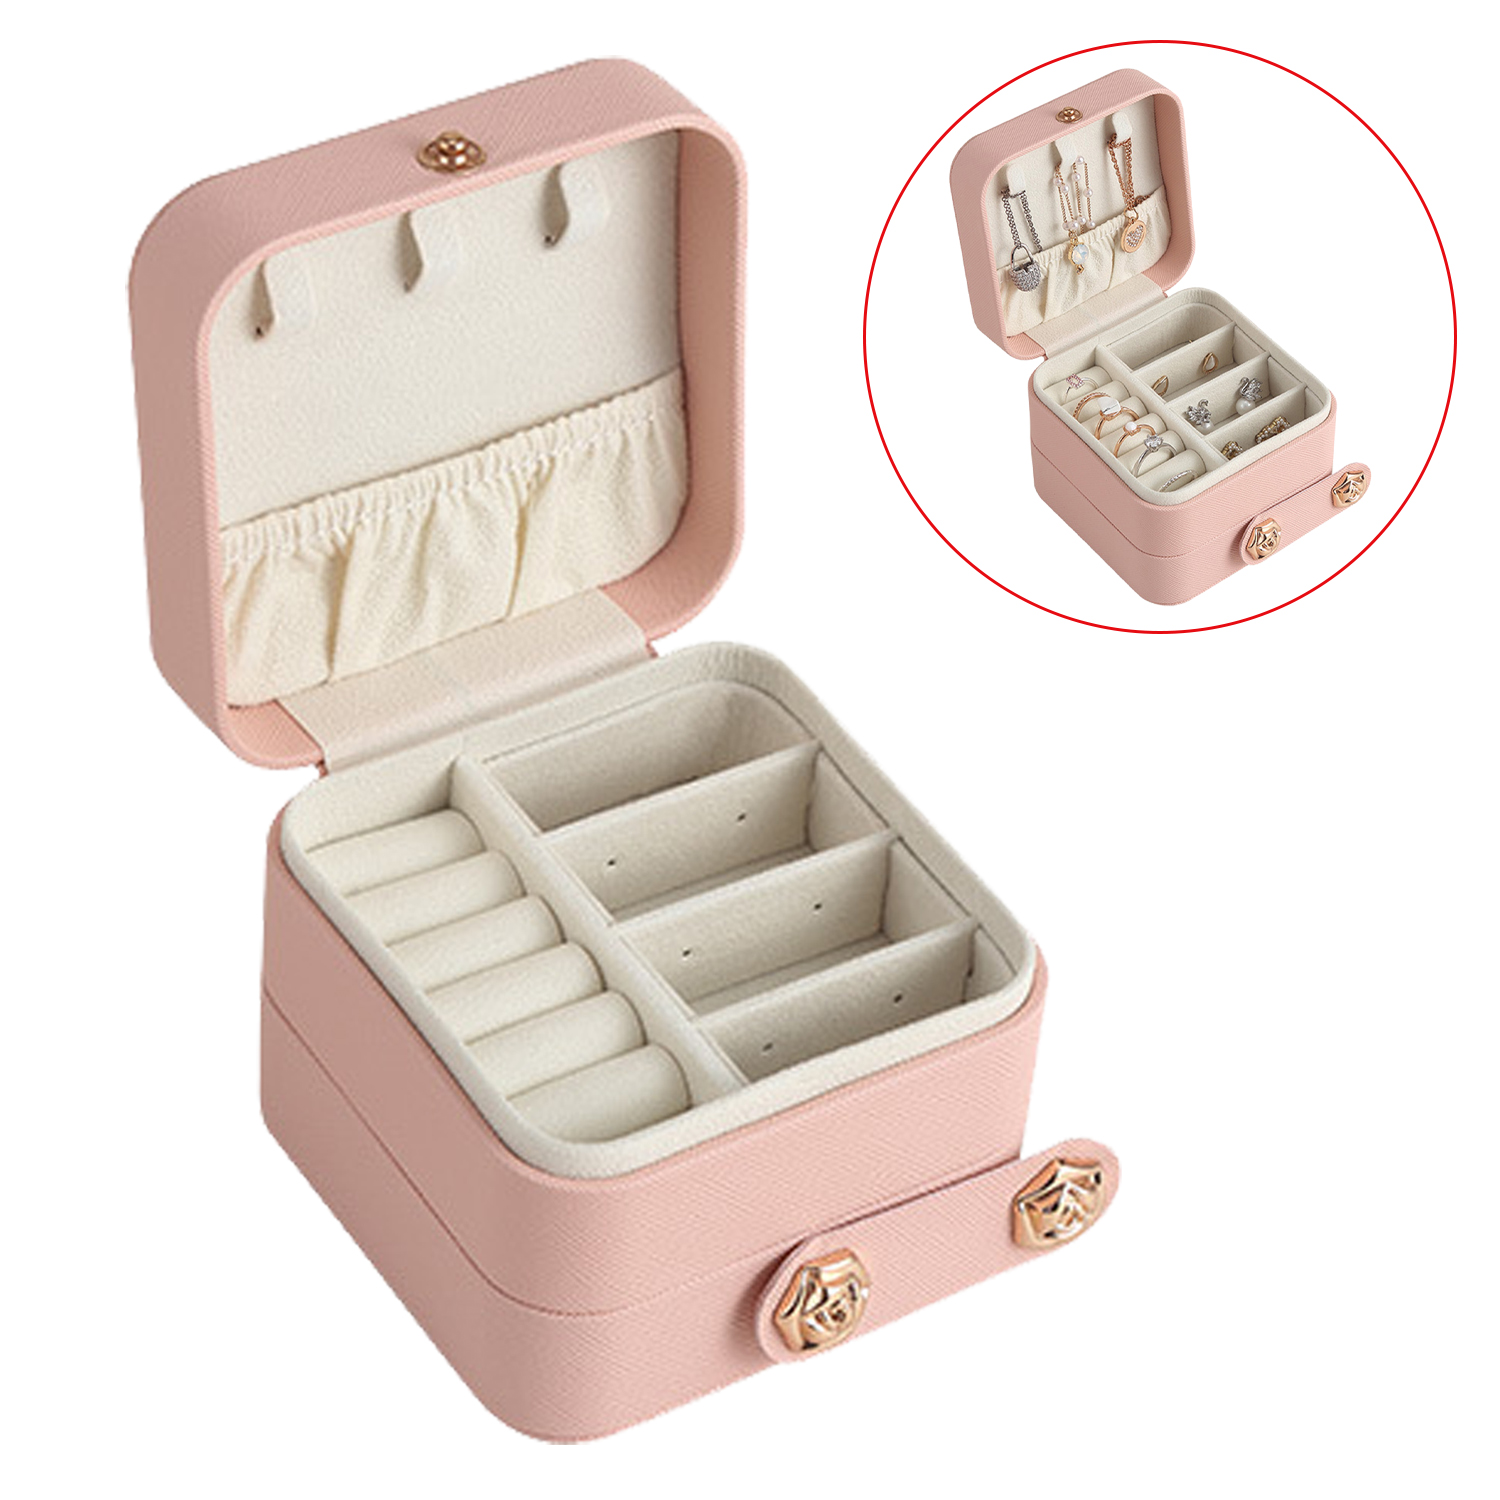 Wholesale PU Leather Small Double Layer Square Jewelry Box Travel Jewellery Organizer Necklace Ring Earring Gift Case